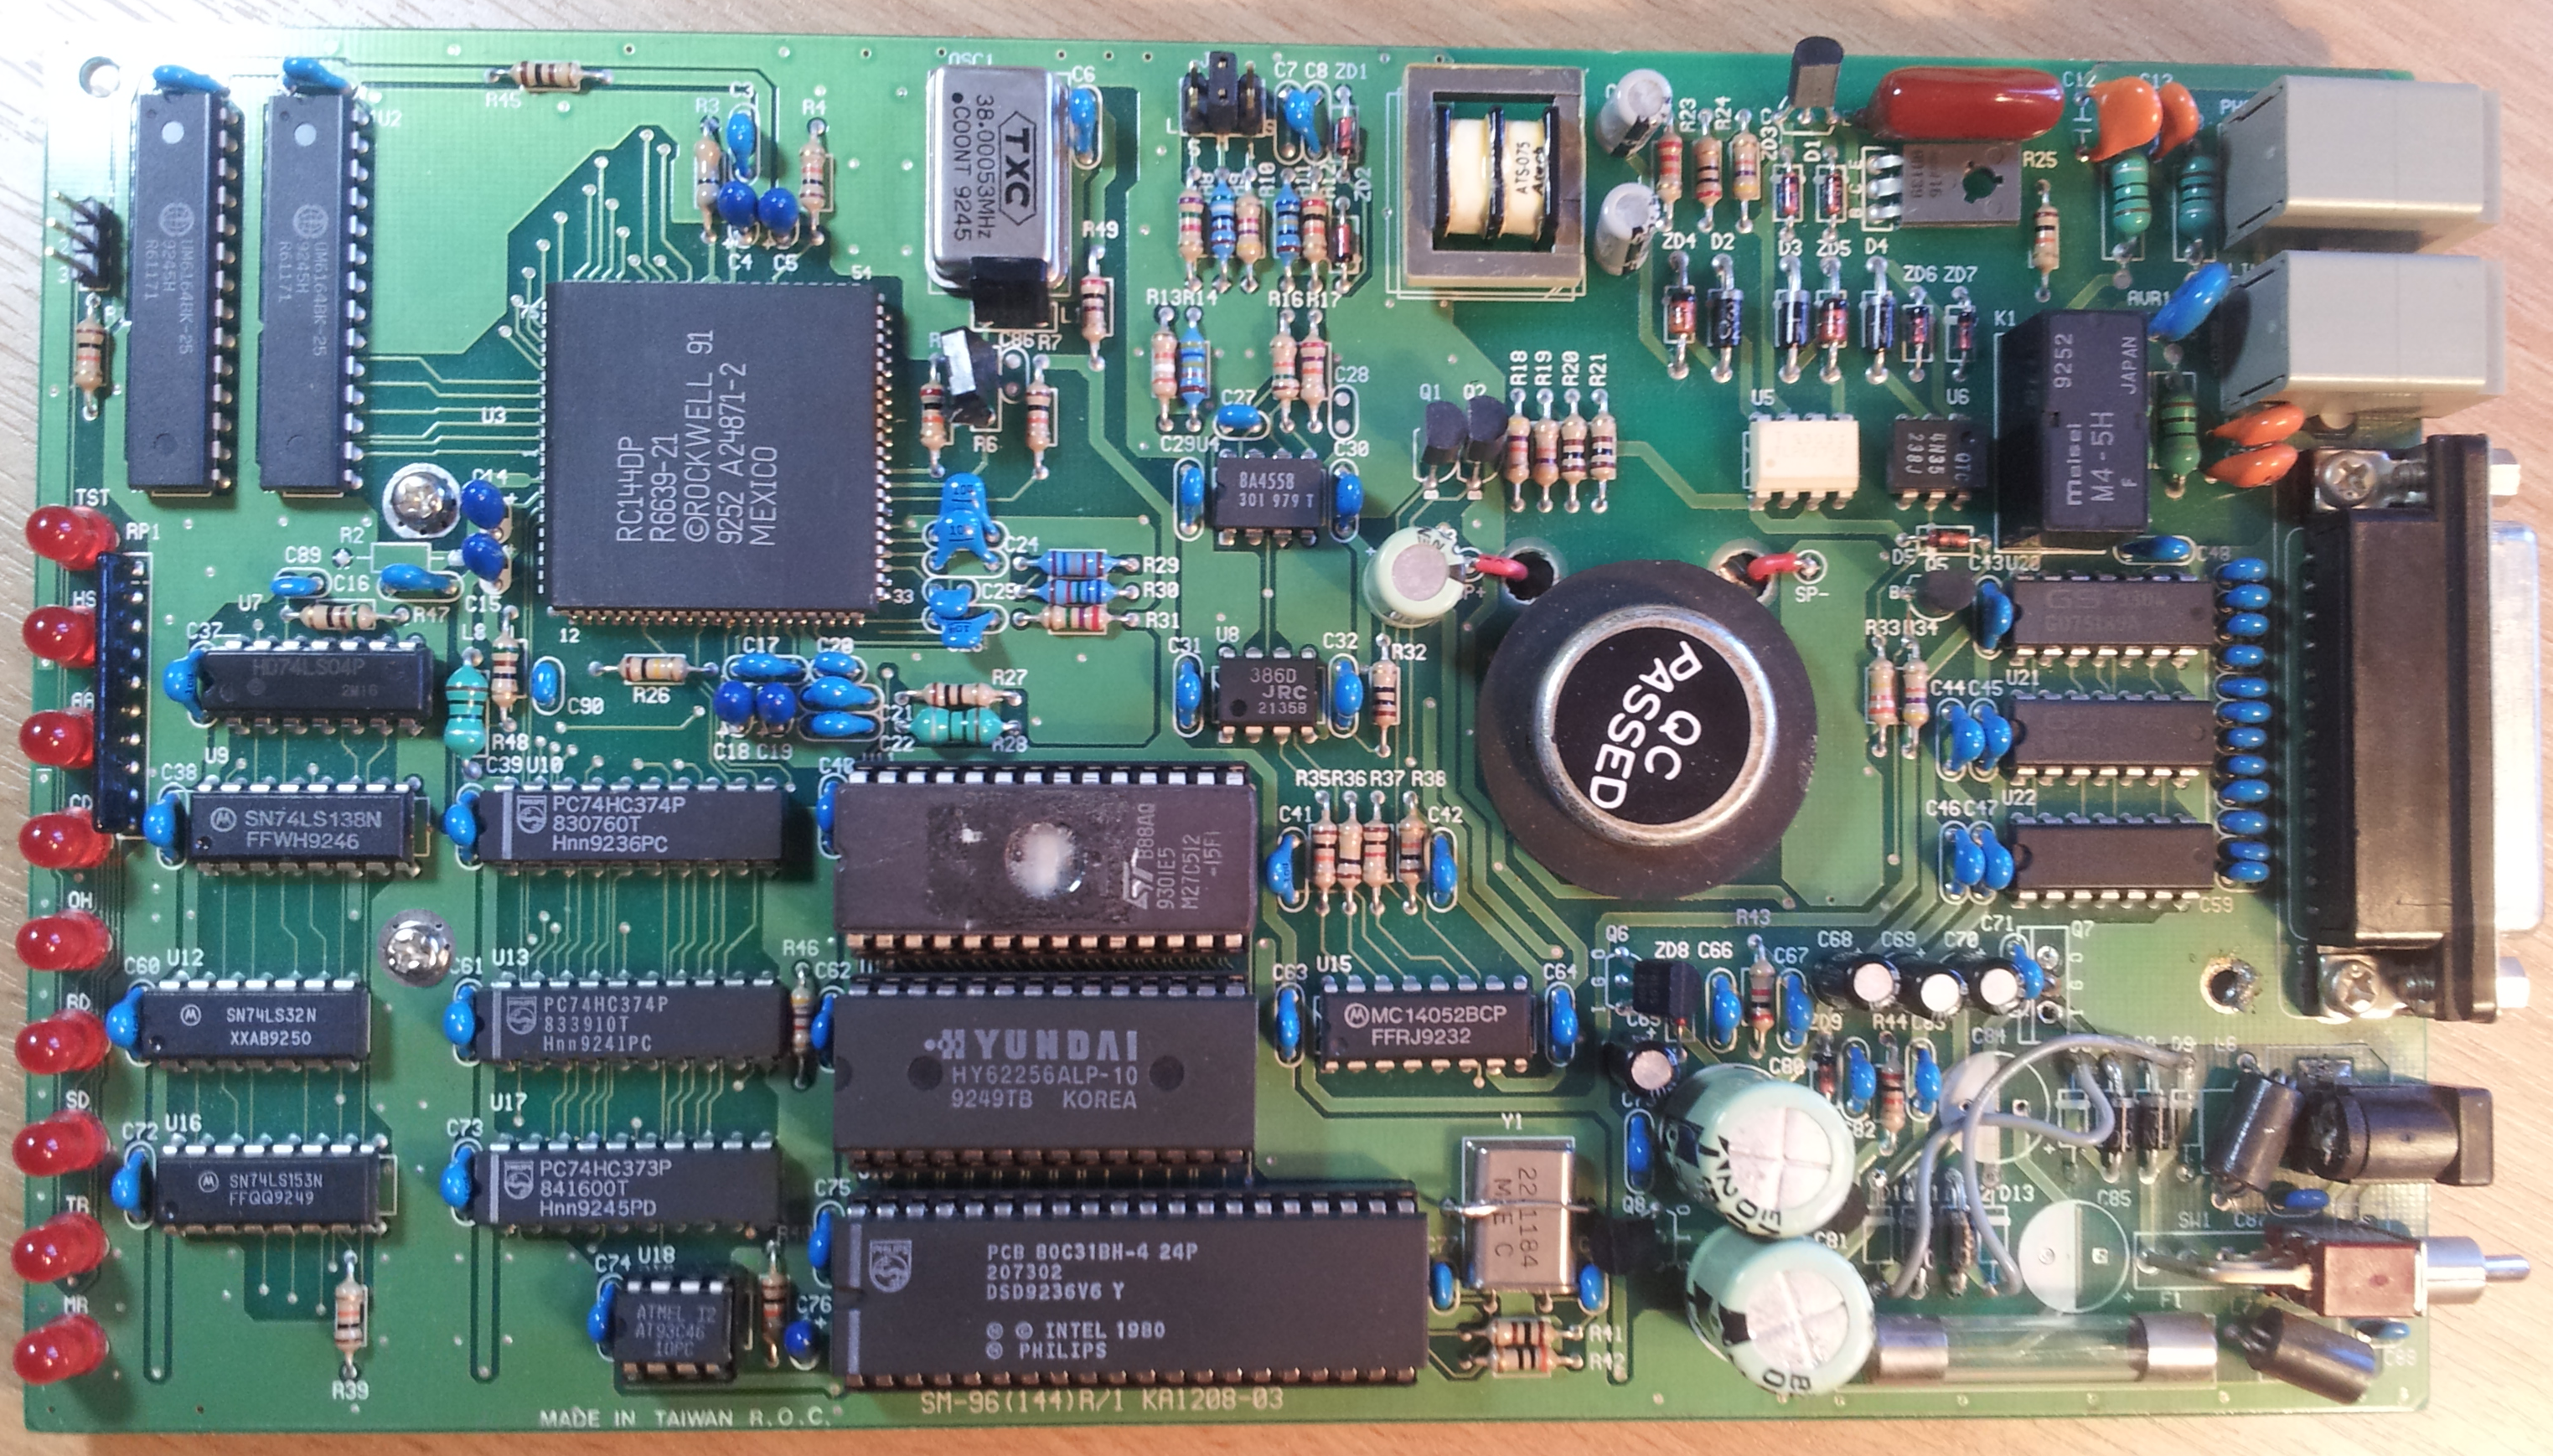 PCB of a similar modem - but offchip RAM and ROM for the 80C31 microcontroller.